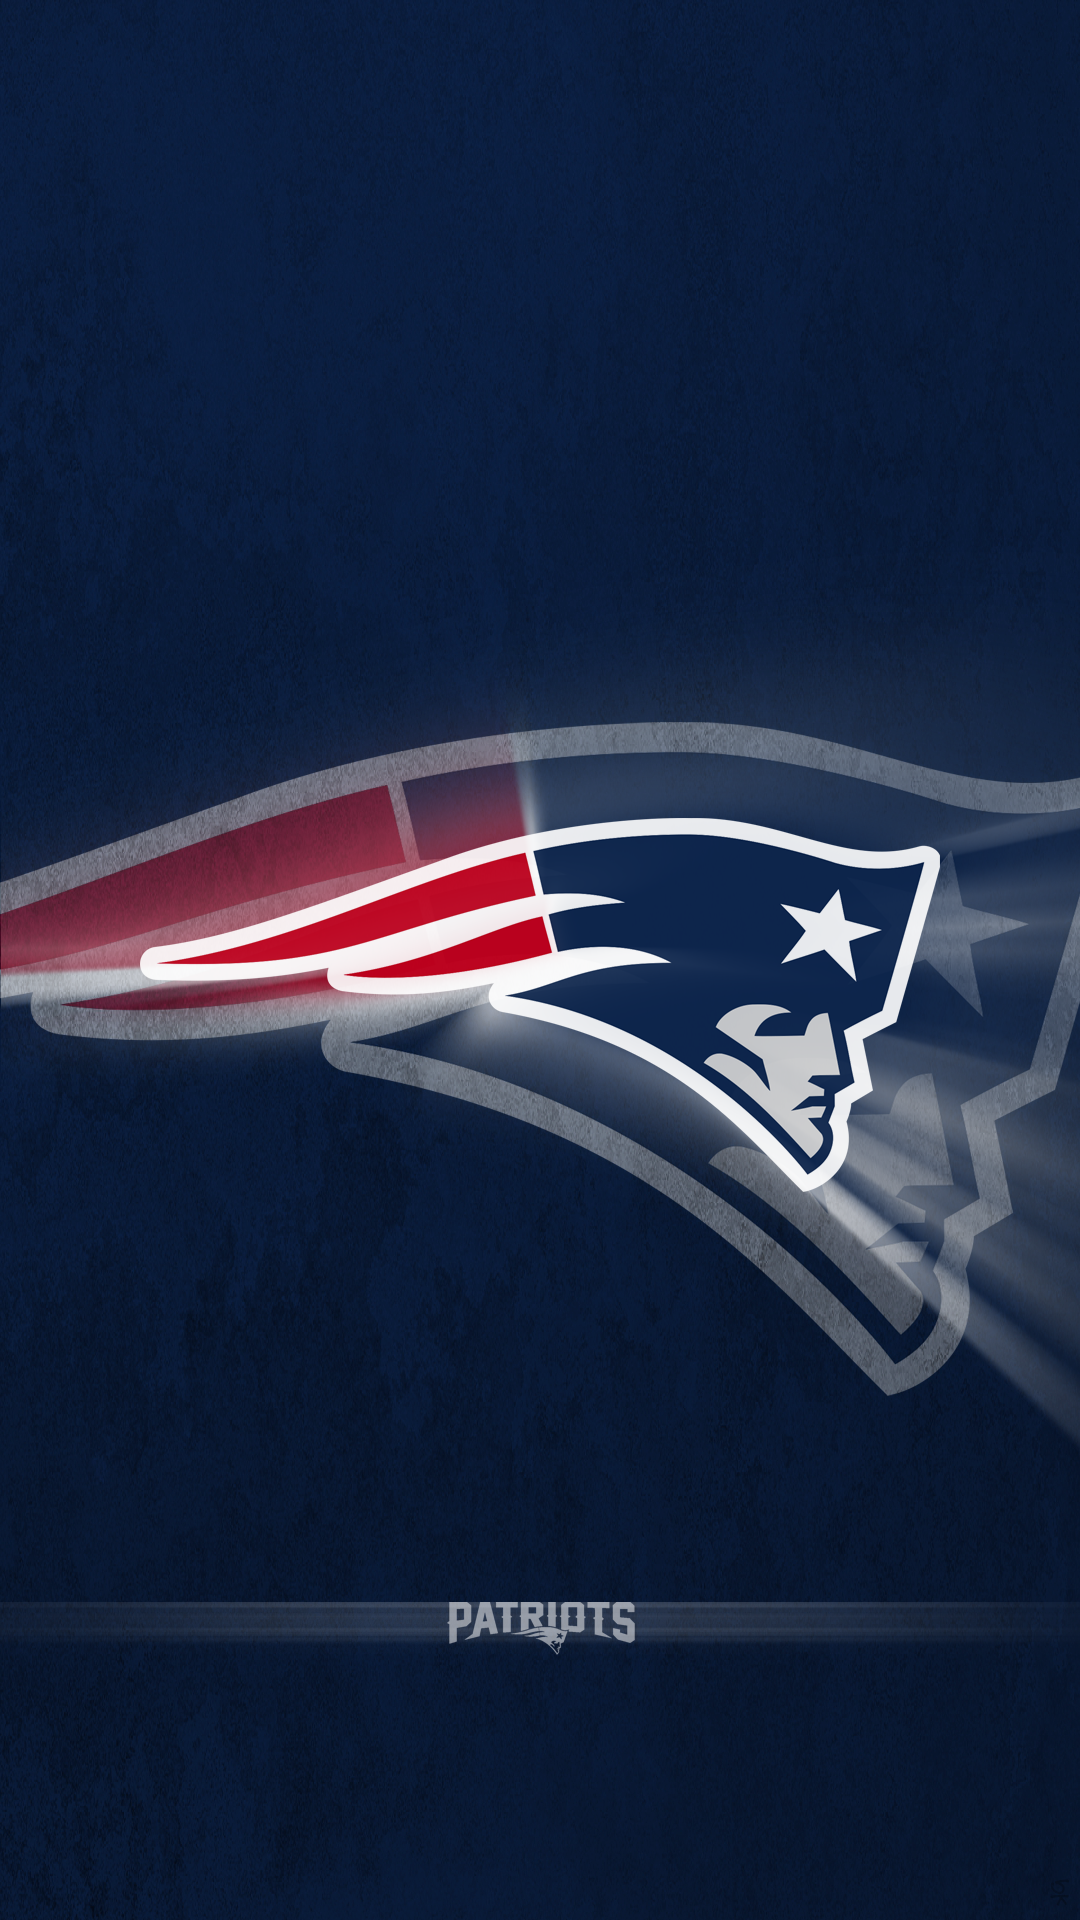 Wallpaper Of The Week Superbowl Xlix For iPhone And iPad